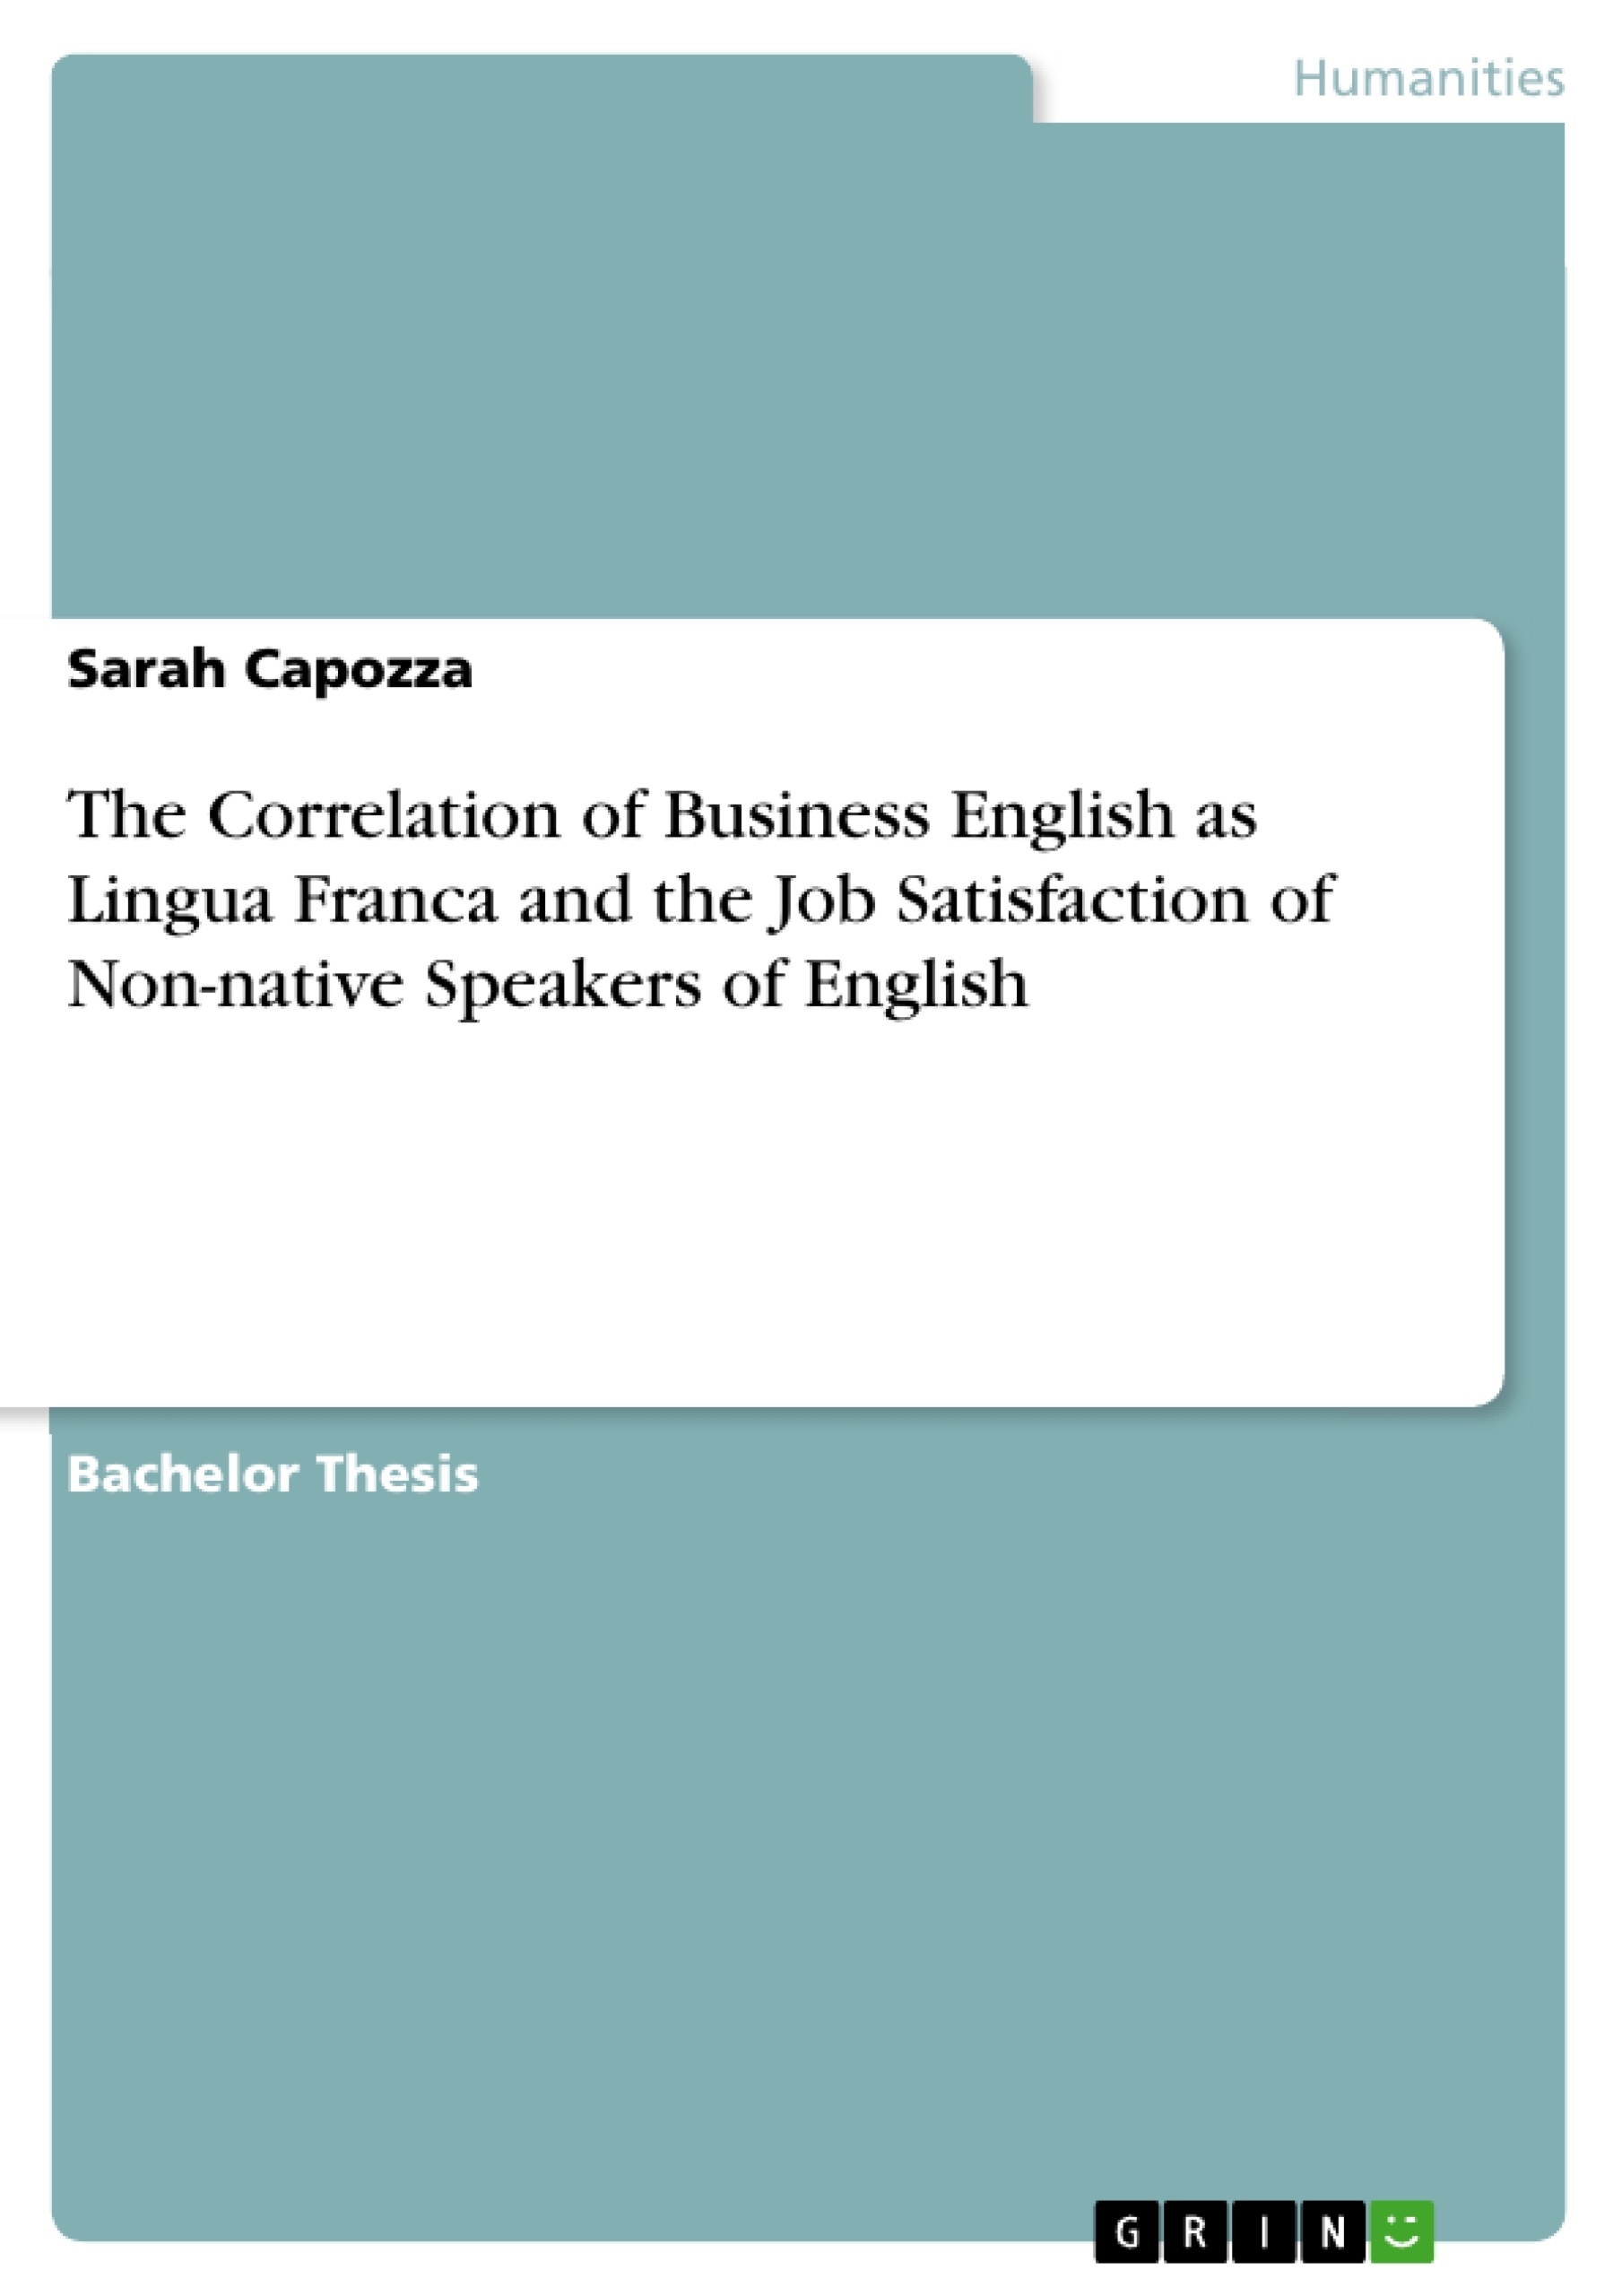 Titre: The Correlation of Business English as Lingua Franca and the Job Satisfaction of Non-native Speakers of English